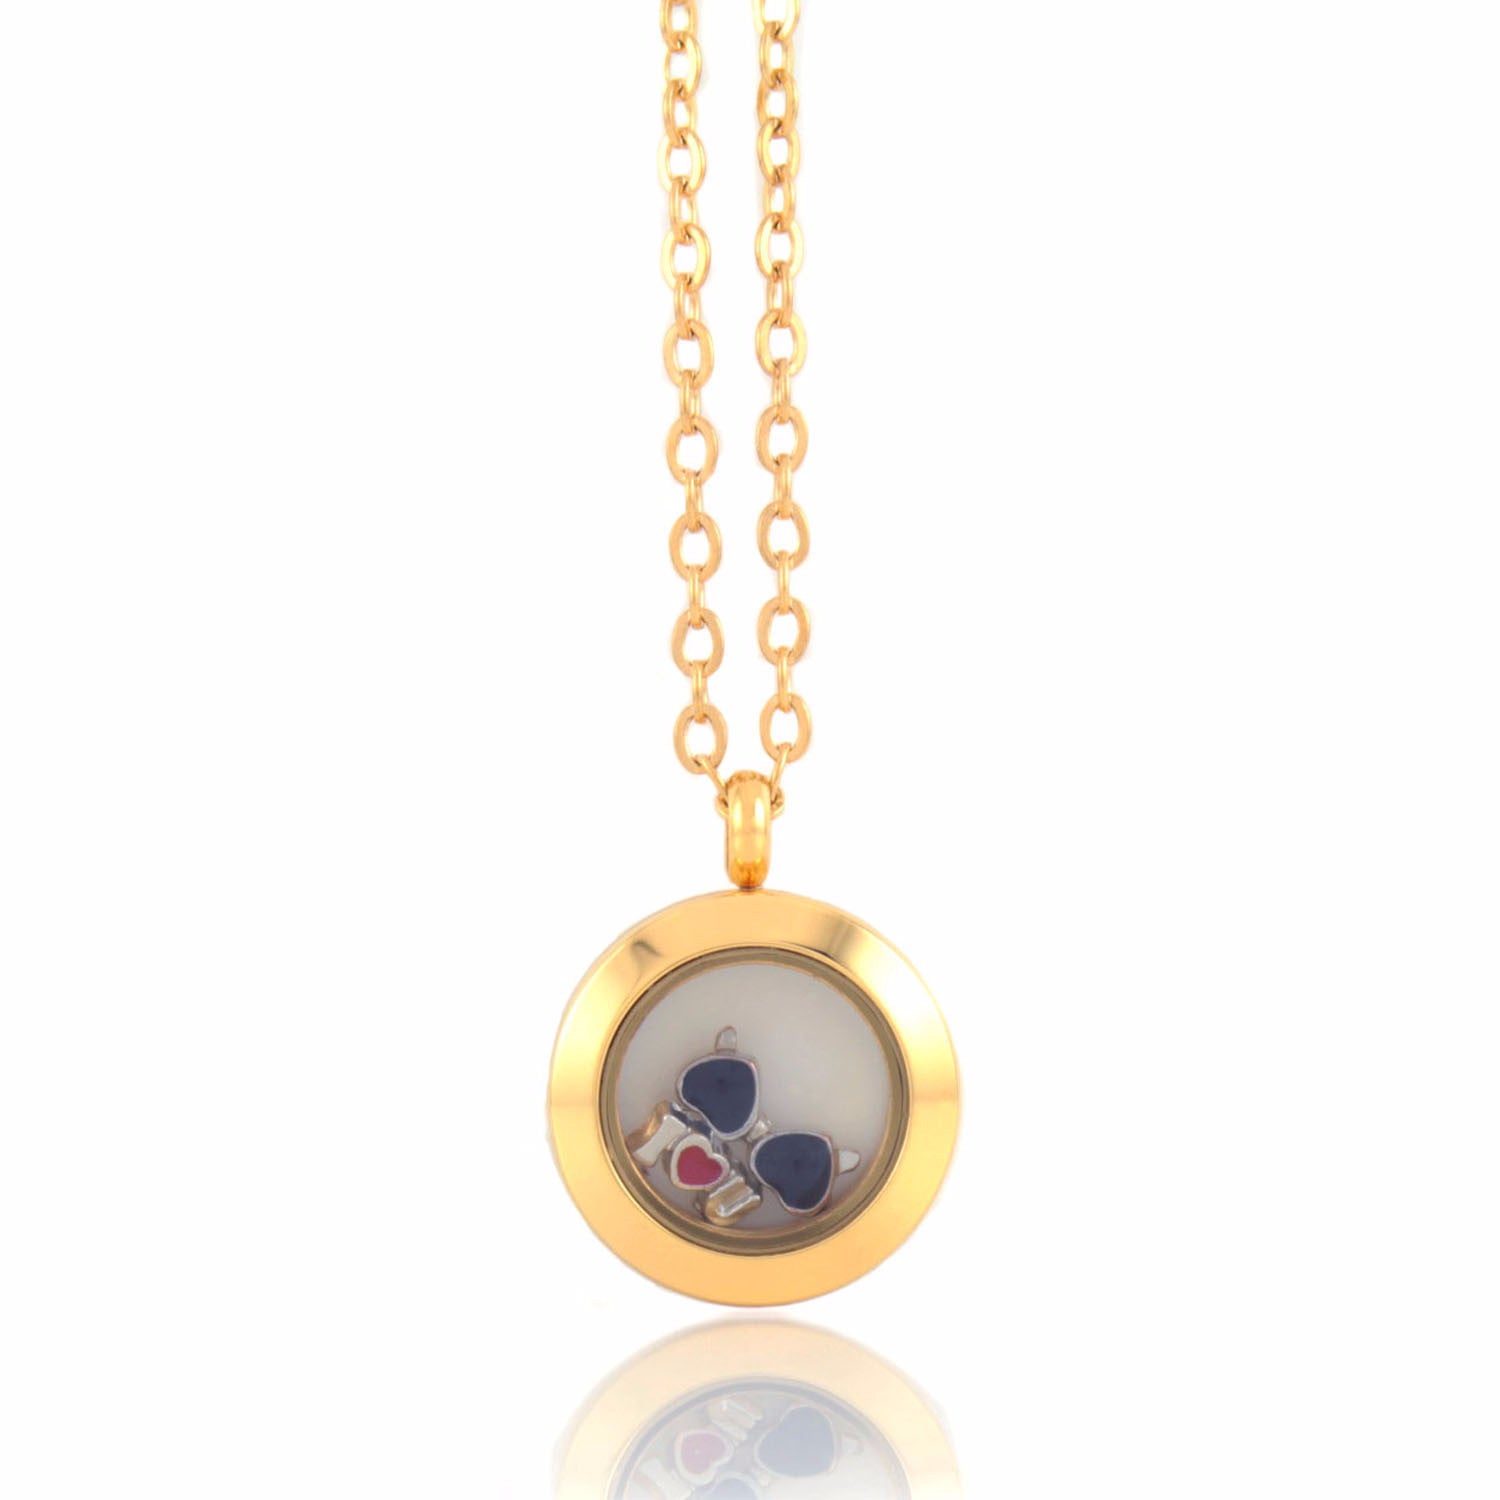 Stainless Steel FloatingLocket Necklace with 4 Charms (Mini Gold No Stone)